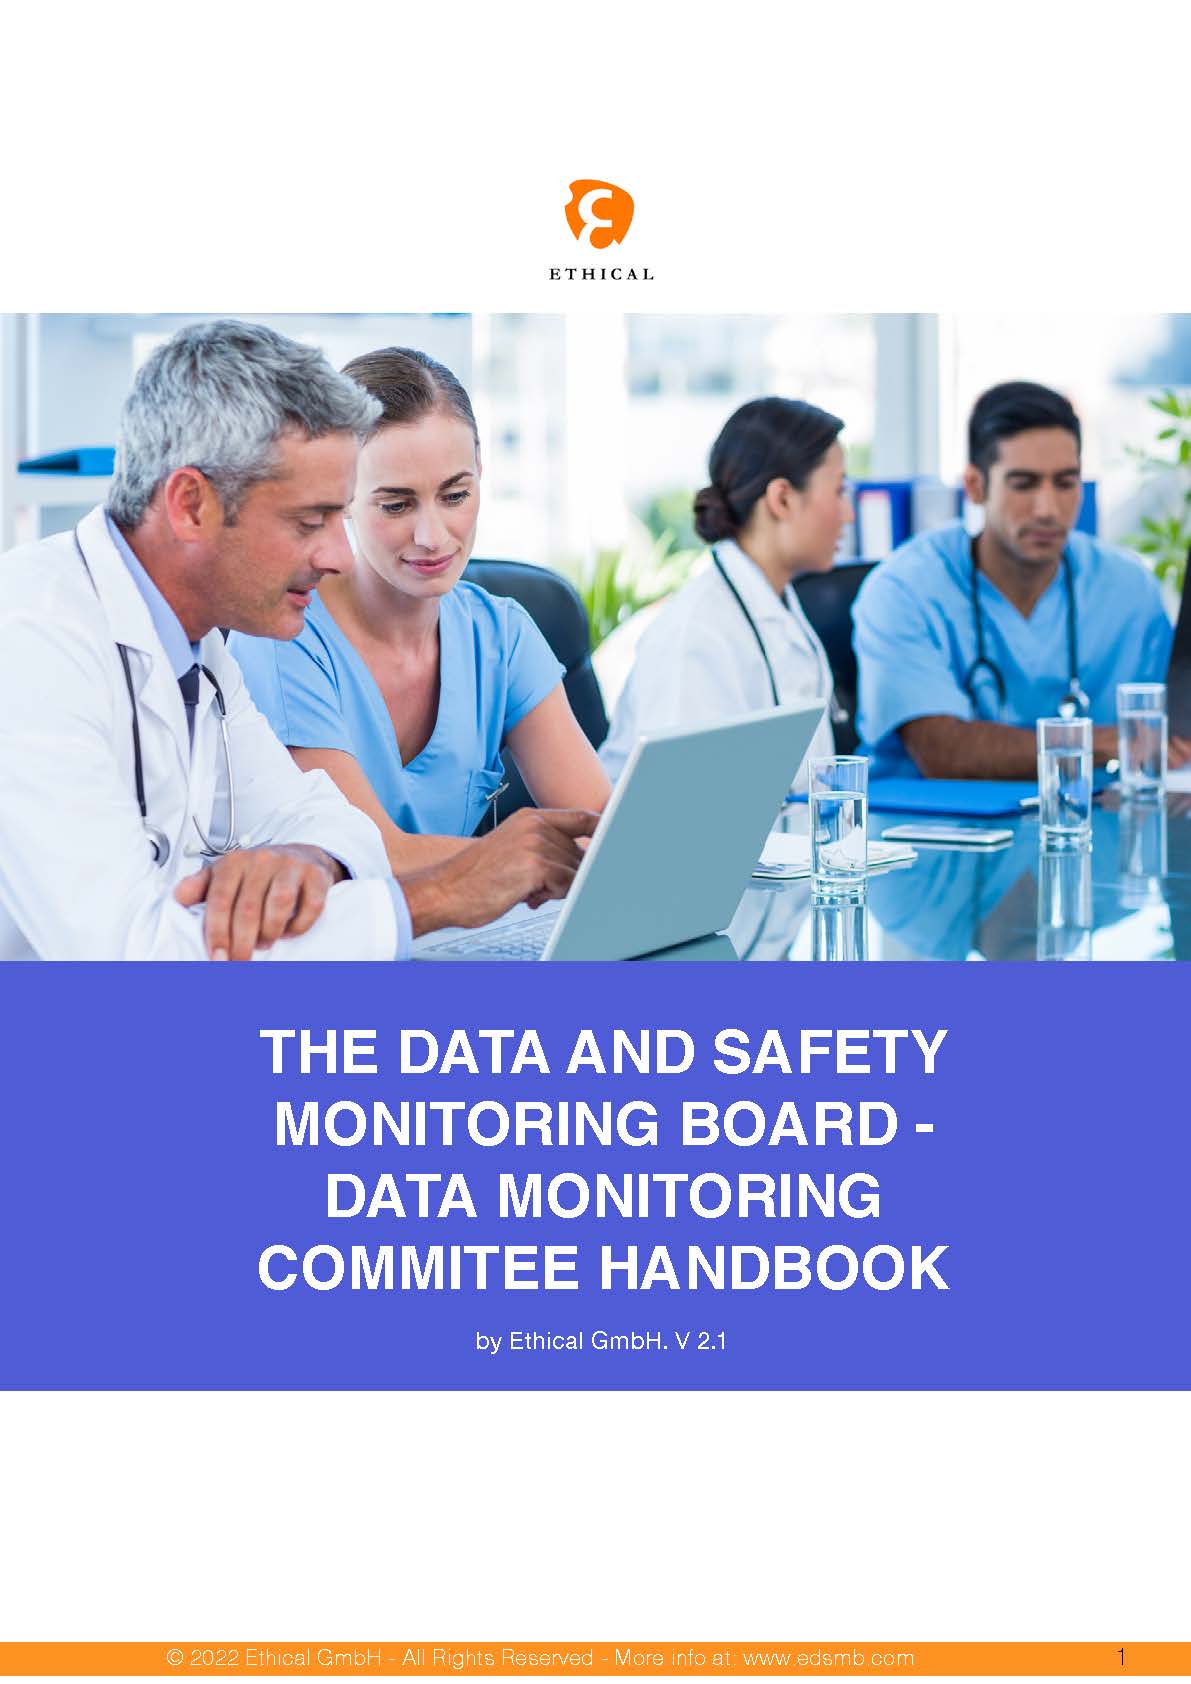 How-to Guide: Governing and Maintaining Standards for Collecting Clinical Data